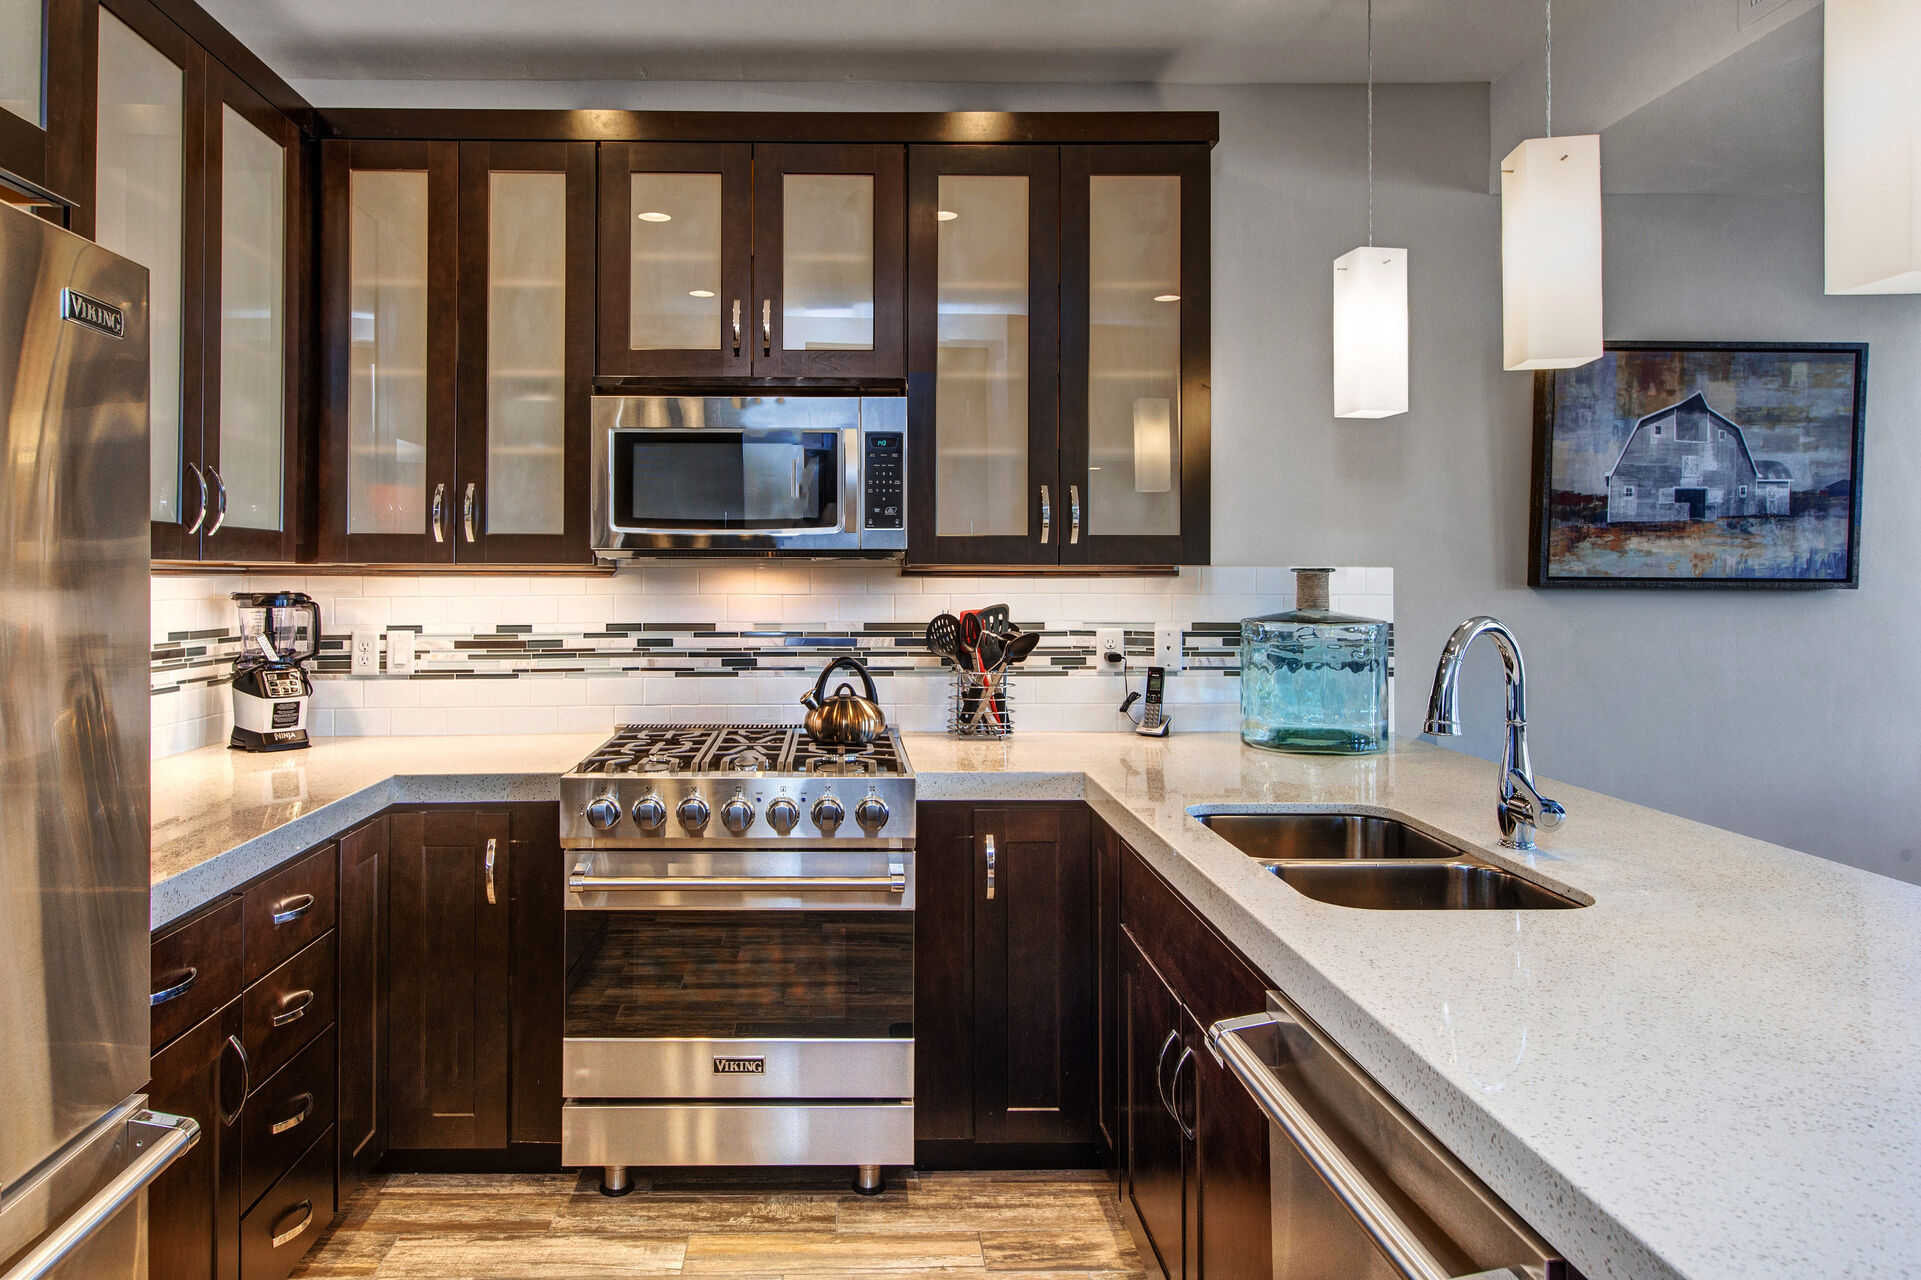 Fully Equipped Kitchen with Viking Stainless-Steel Appliances, Including a 5-Burner Gas Range